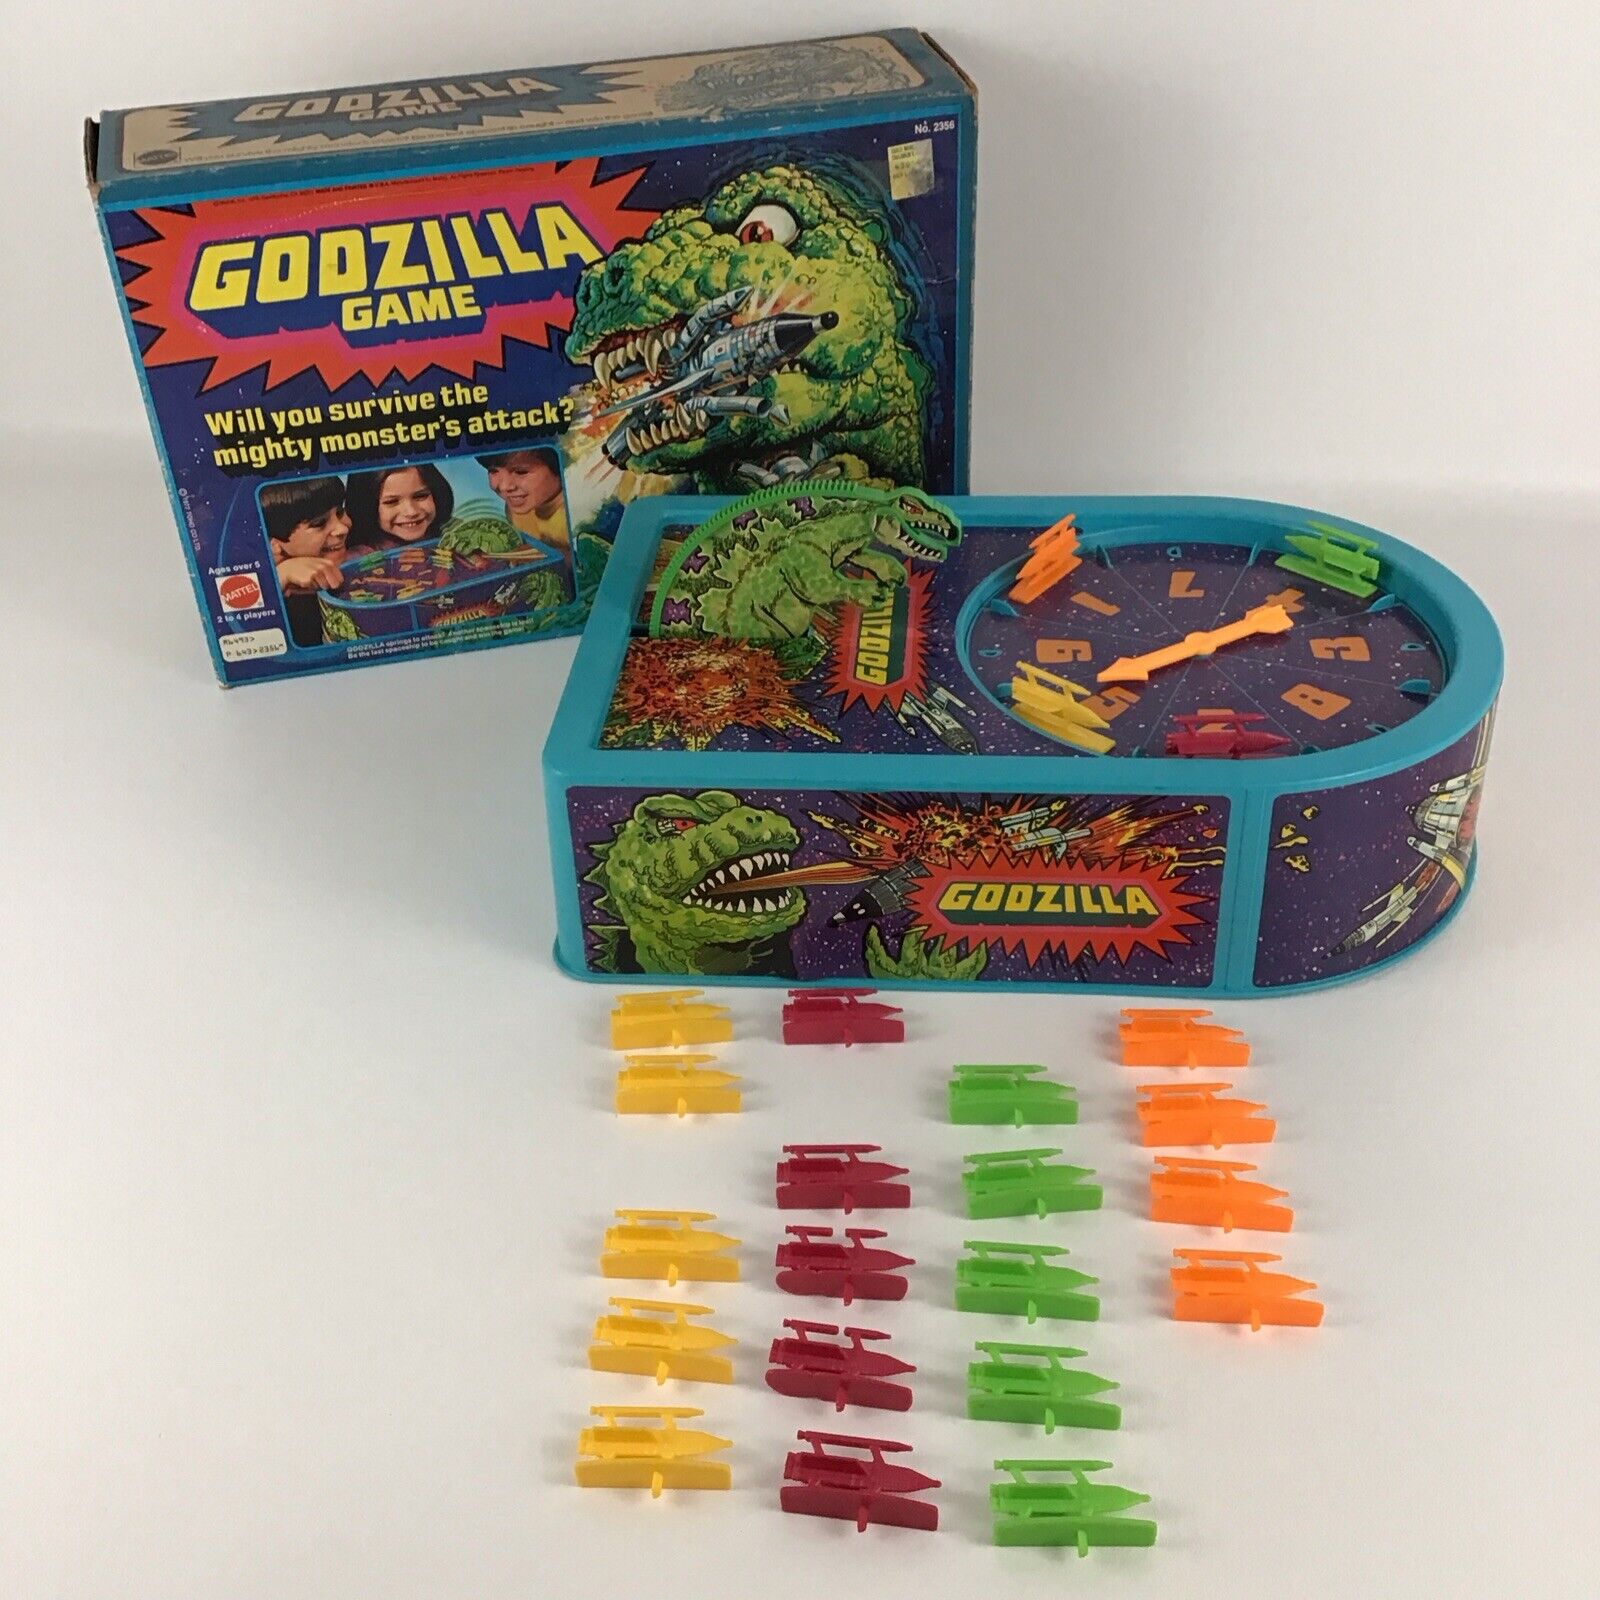 GODZILLA Game Vintage 1977 Mattel Excellent with Box Missing Instructions & 1 Pc